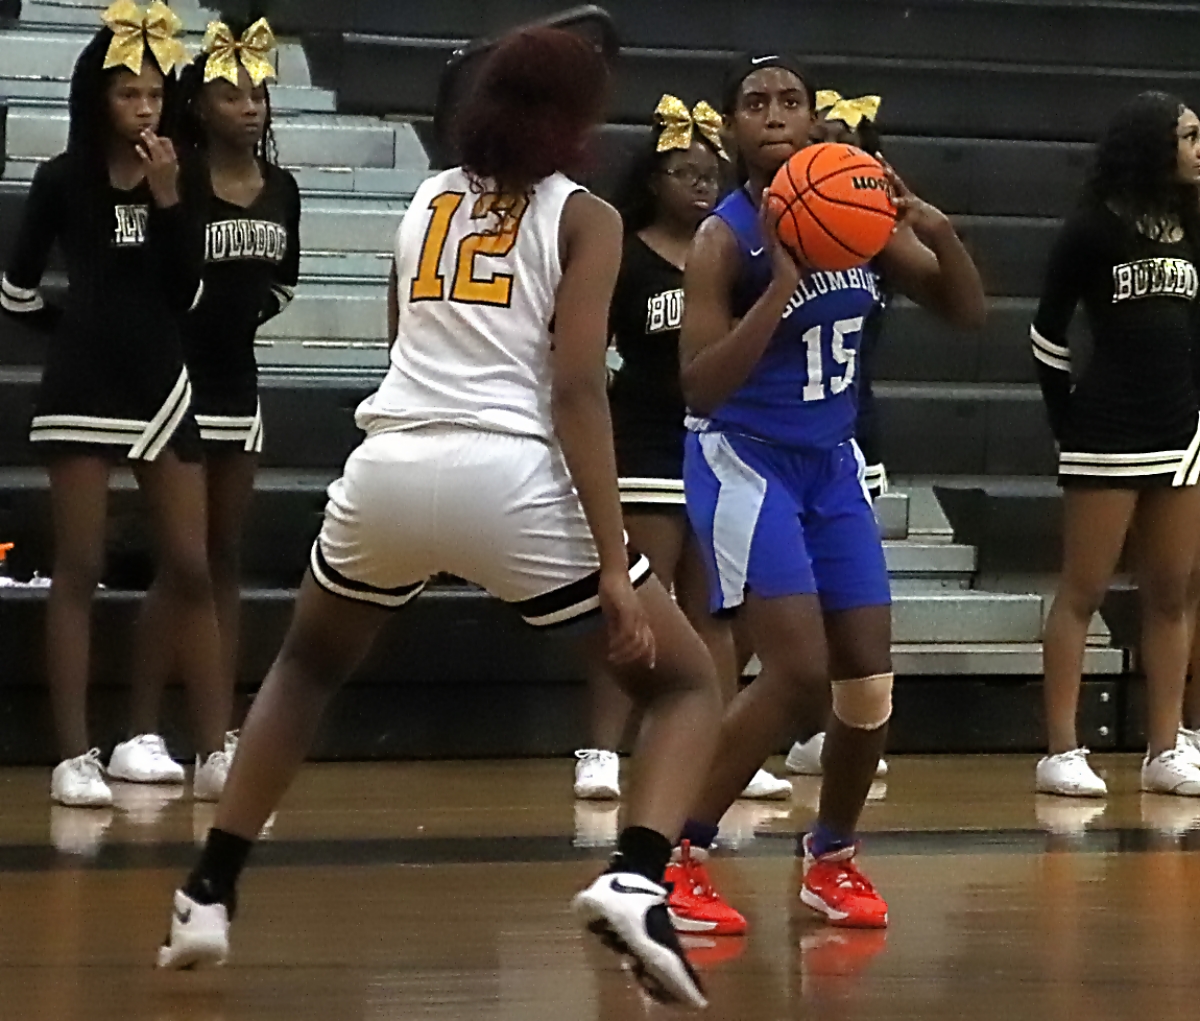 Columbia's Daija Carr (15) lines up for a three-poionter as Zaryana Mitchell (12) defends. during first half acdtion of Columbia's double-overtime win. (Photo by Mark Brock)